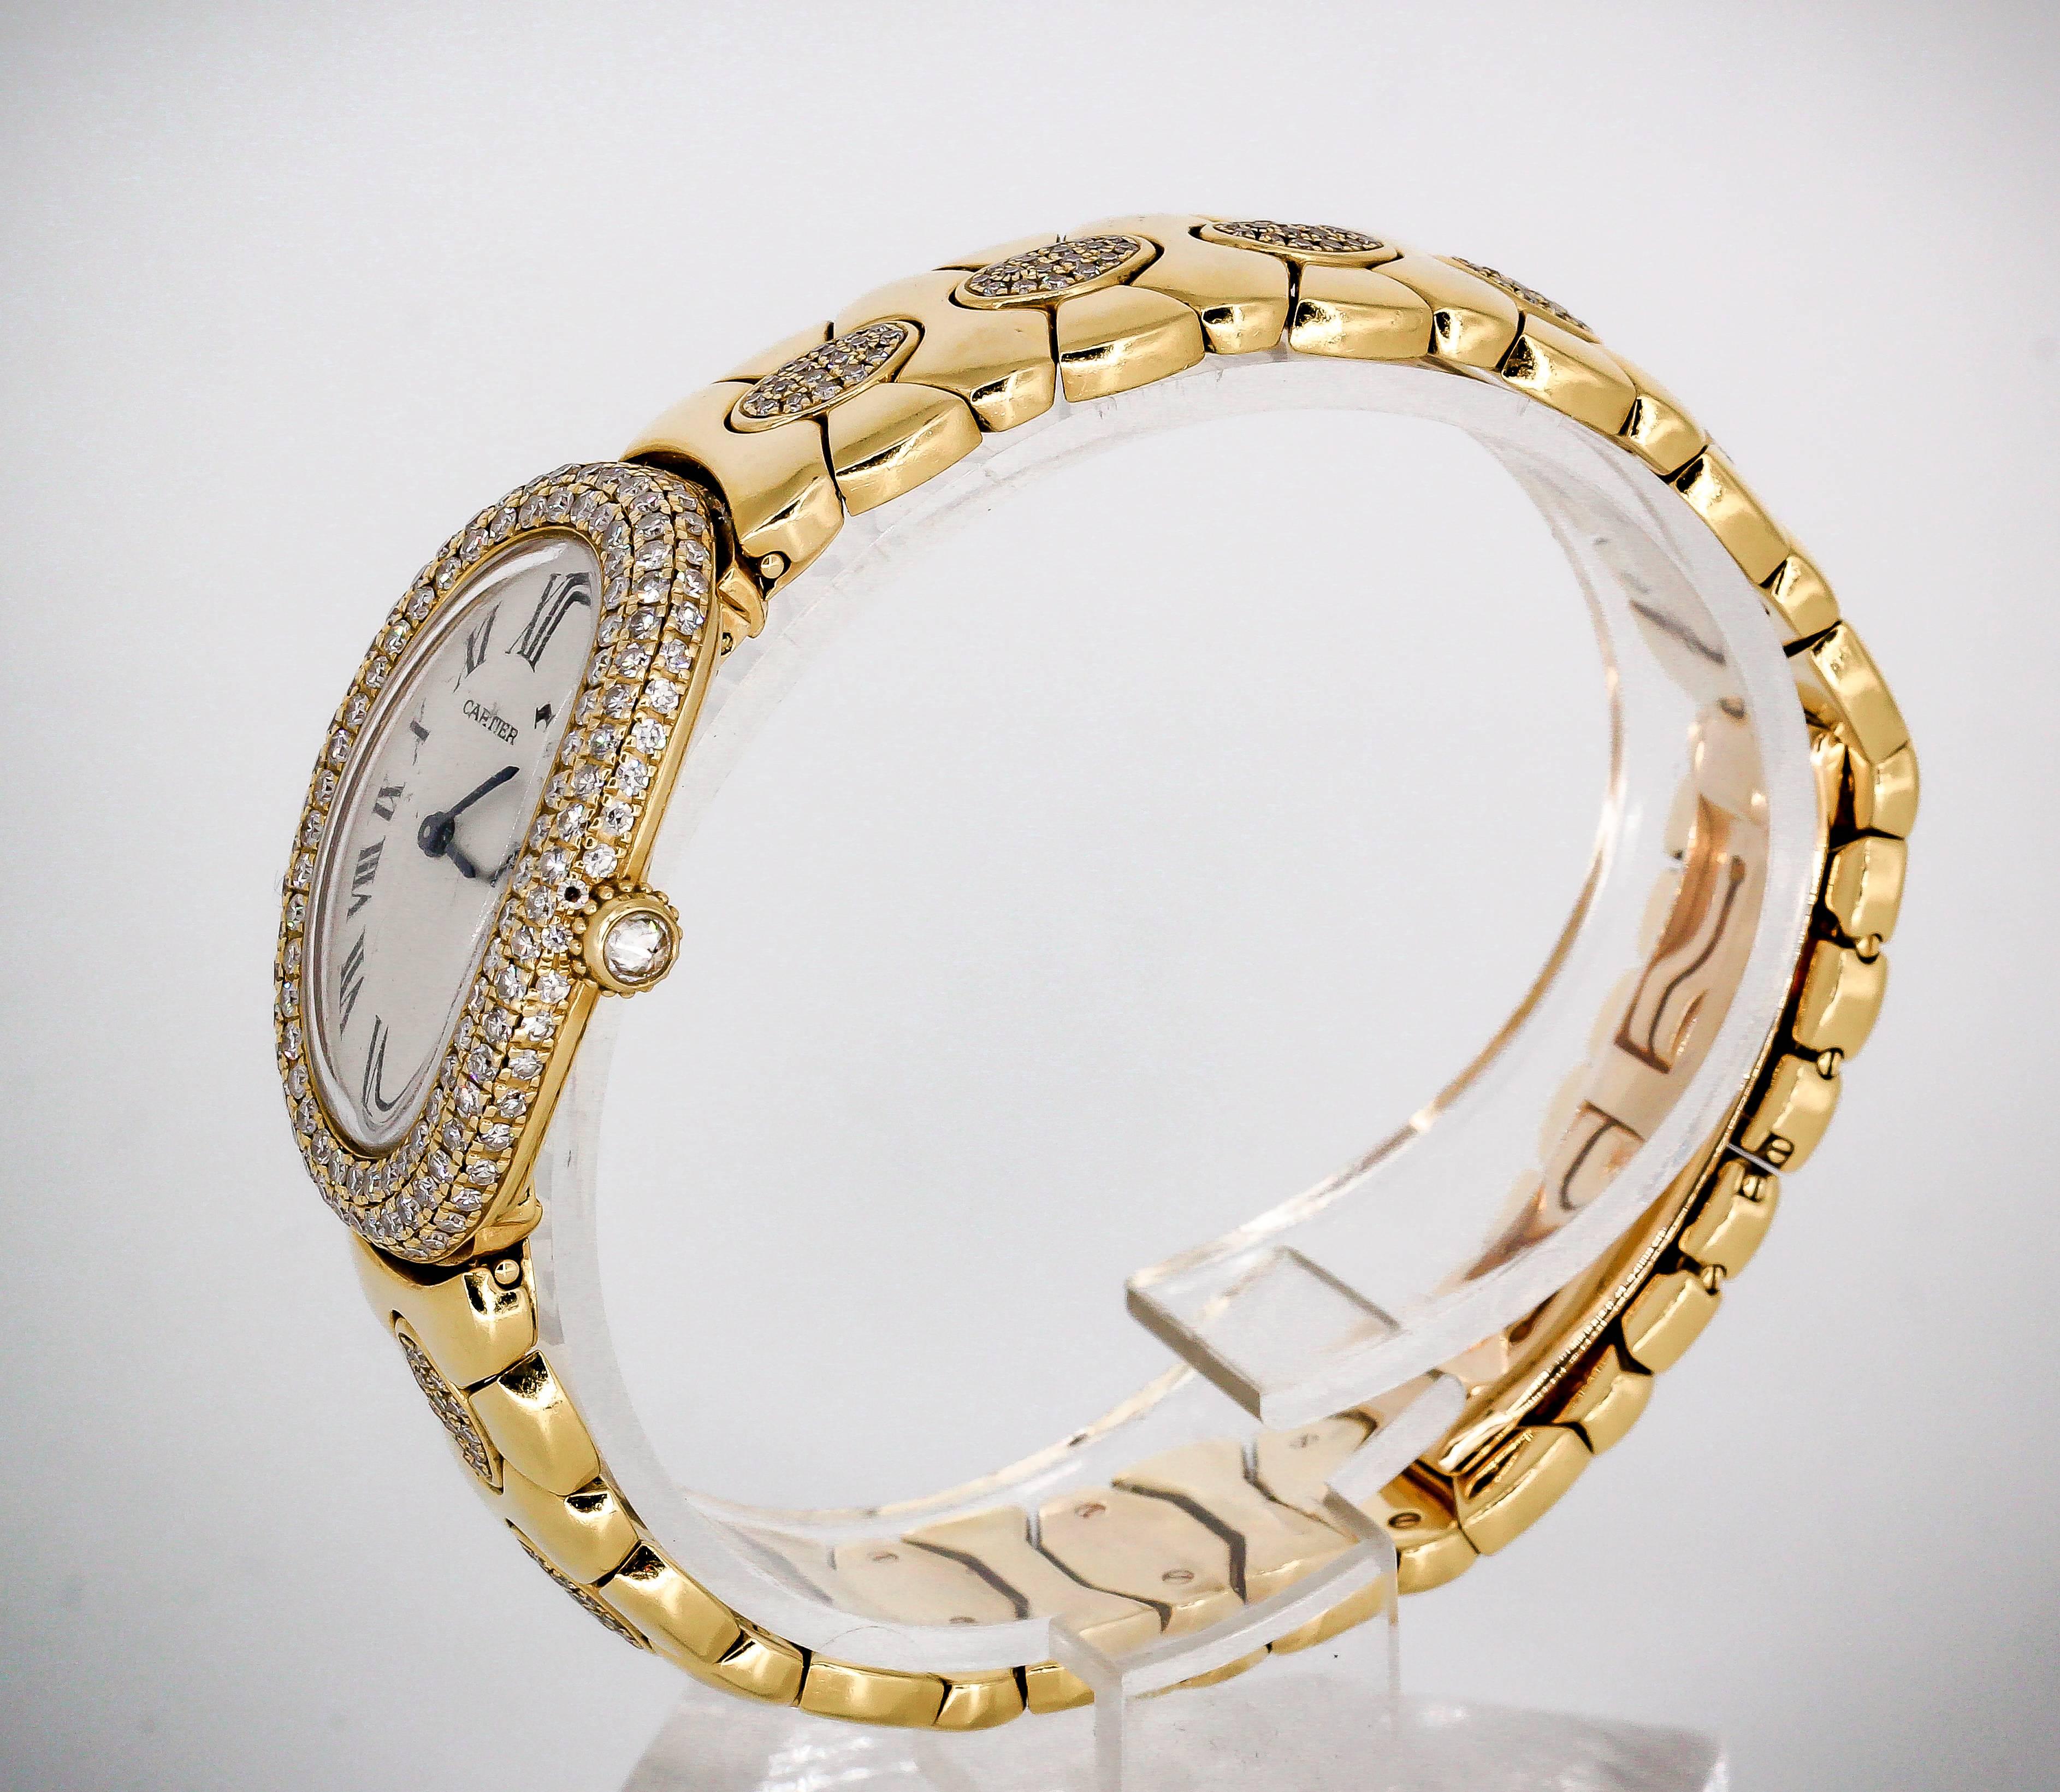 Chic and rare diamond and 18K yellow gold ladies wrist watch from the 